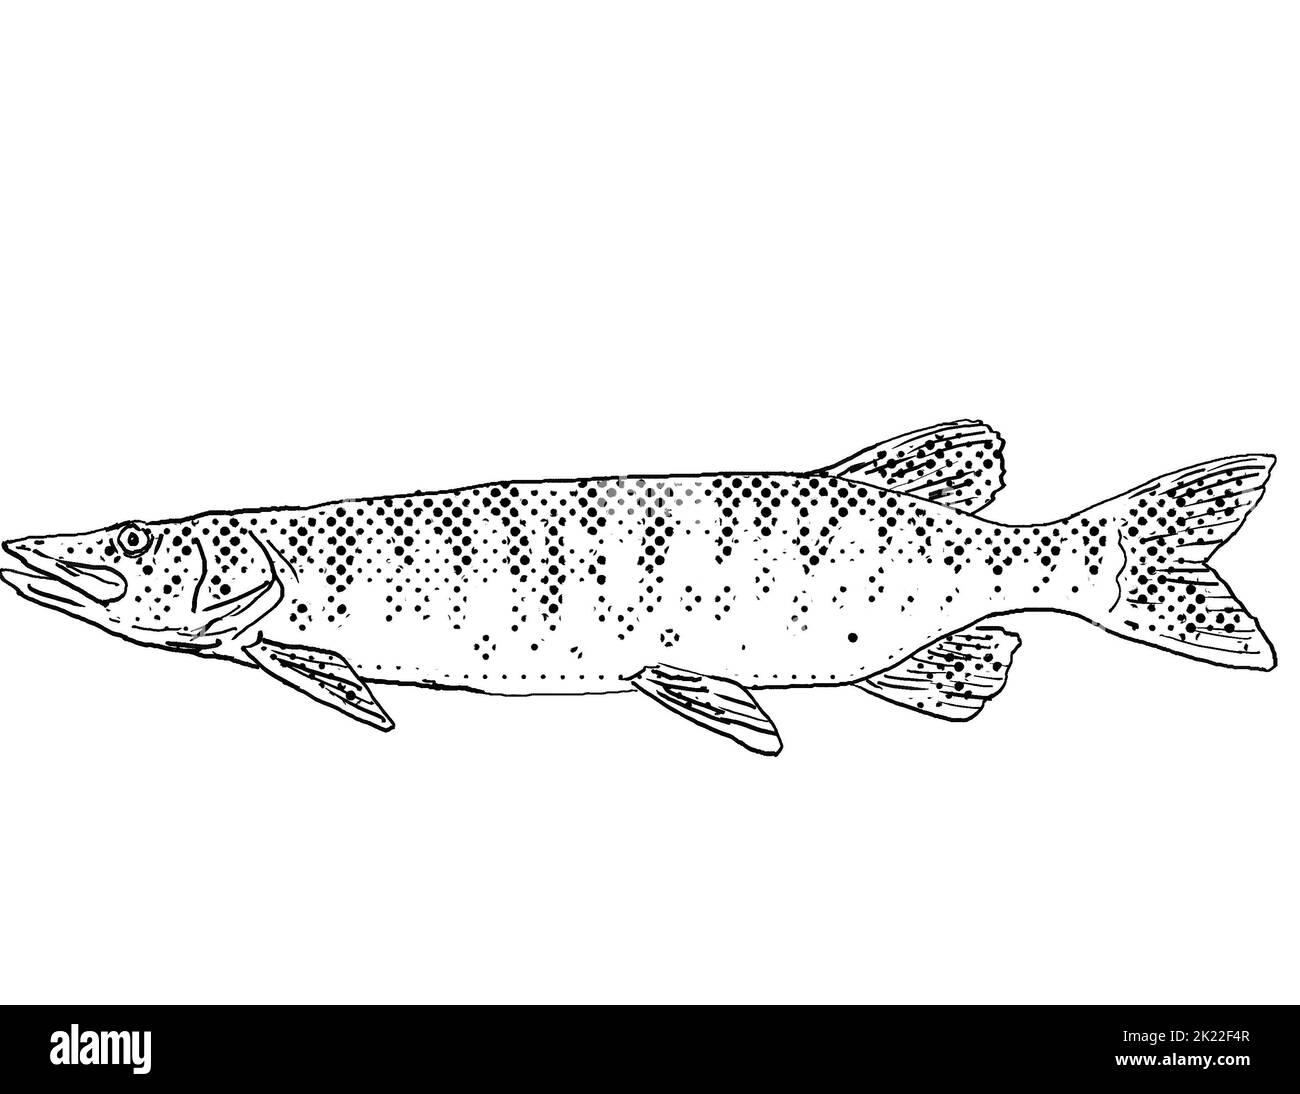 Cartoon style line drawing of a tiger muskellunge or Esox masquinongy lucius or Esox lucius masquinongy tiger muskie a freshwater fish endemic to Nort Stock Photo